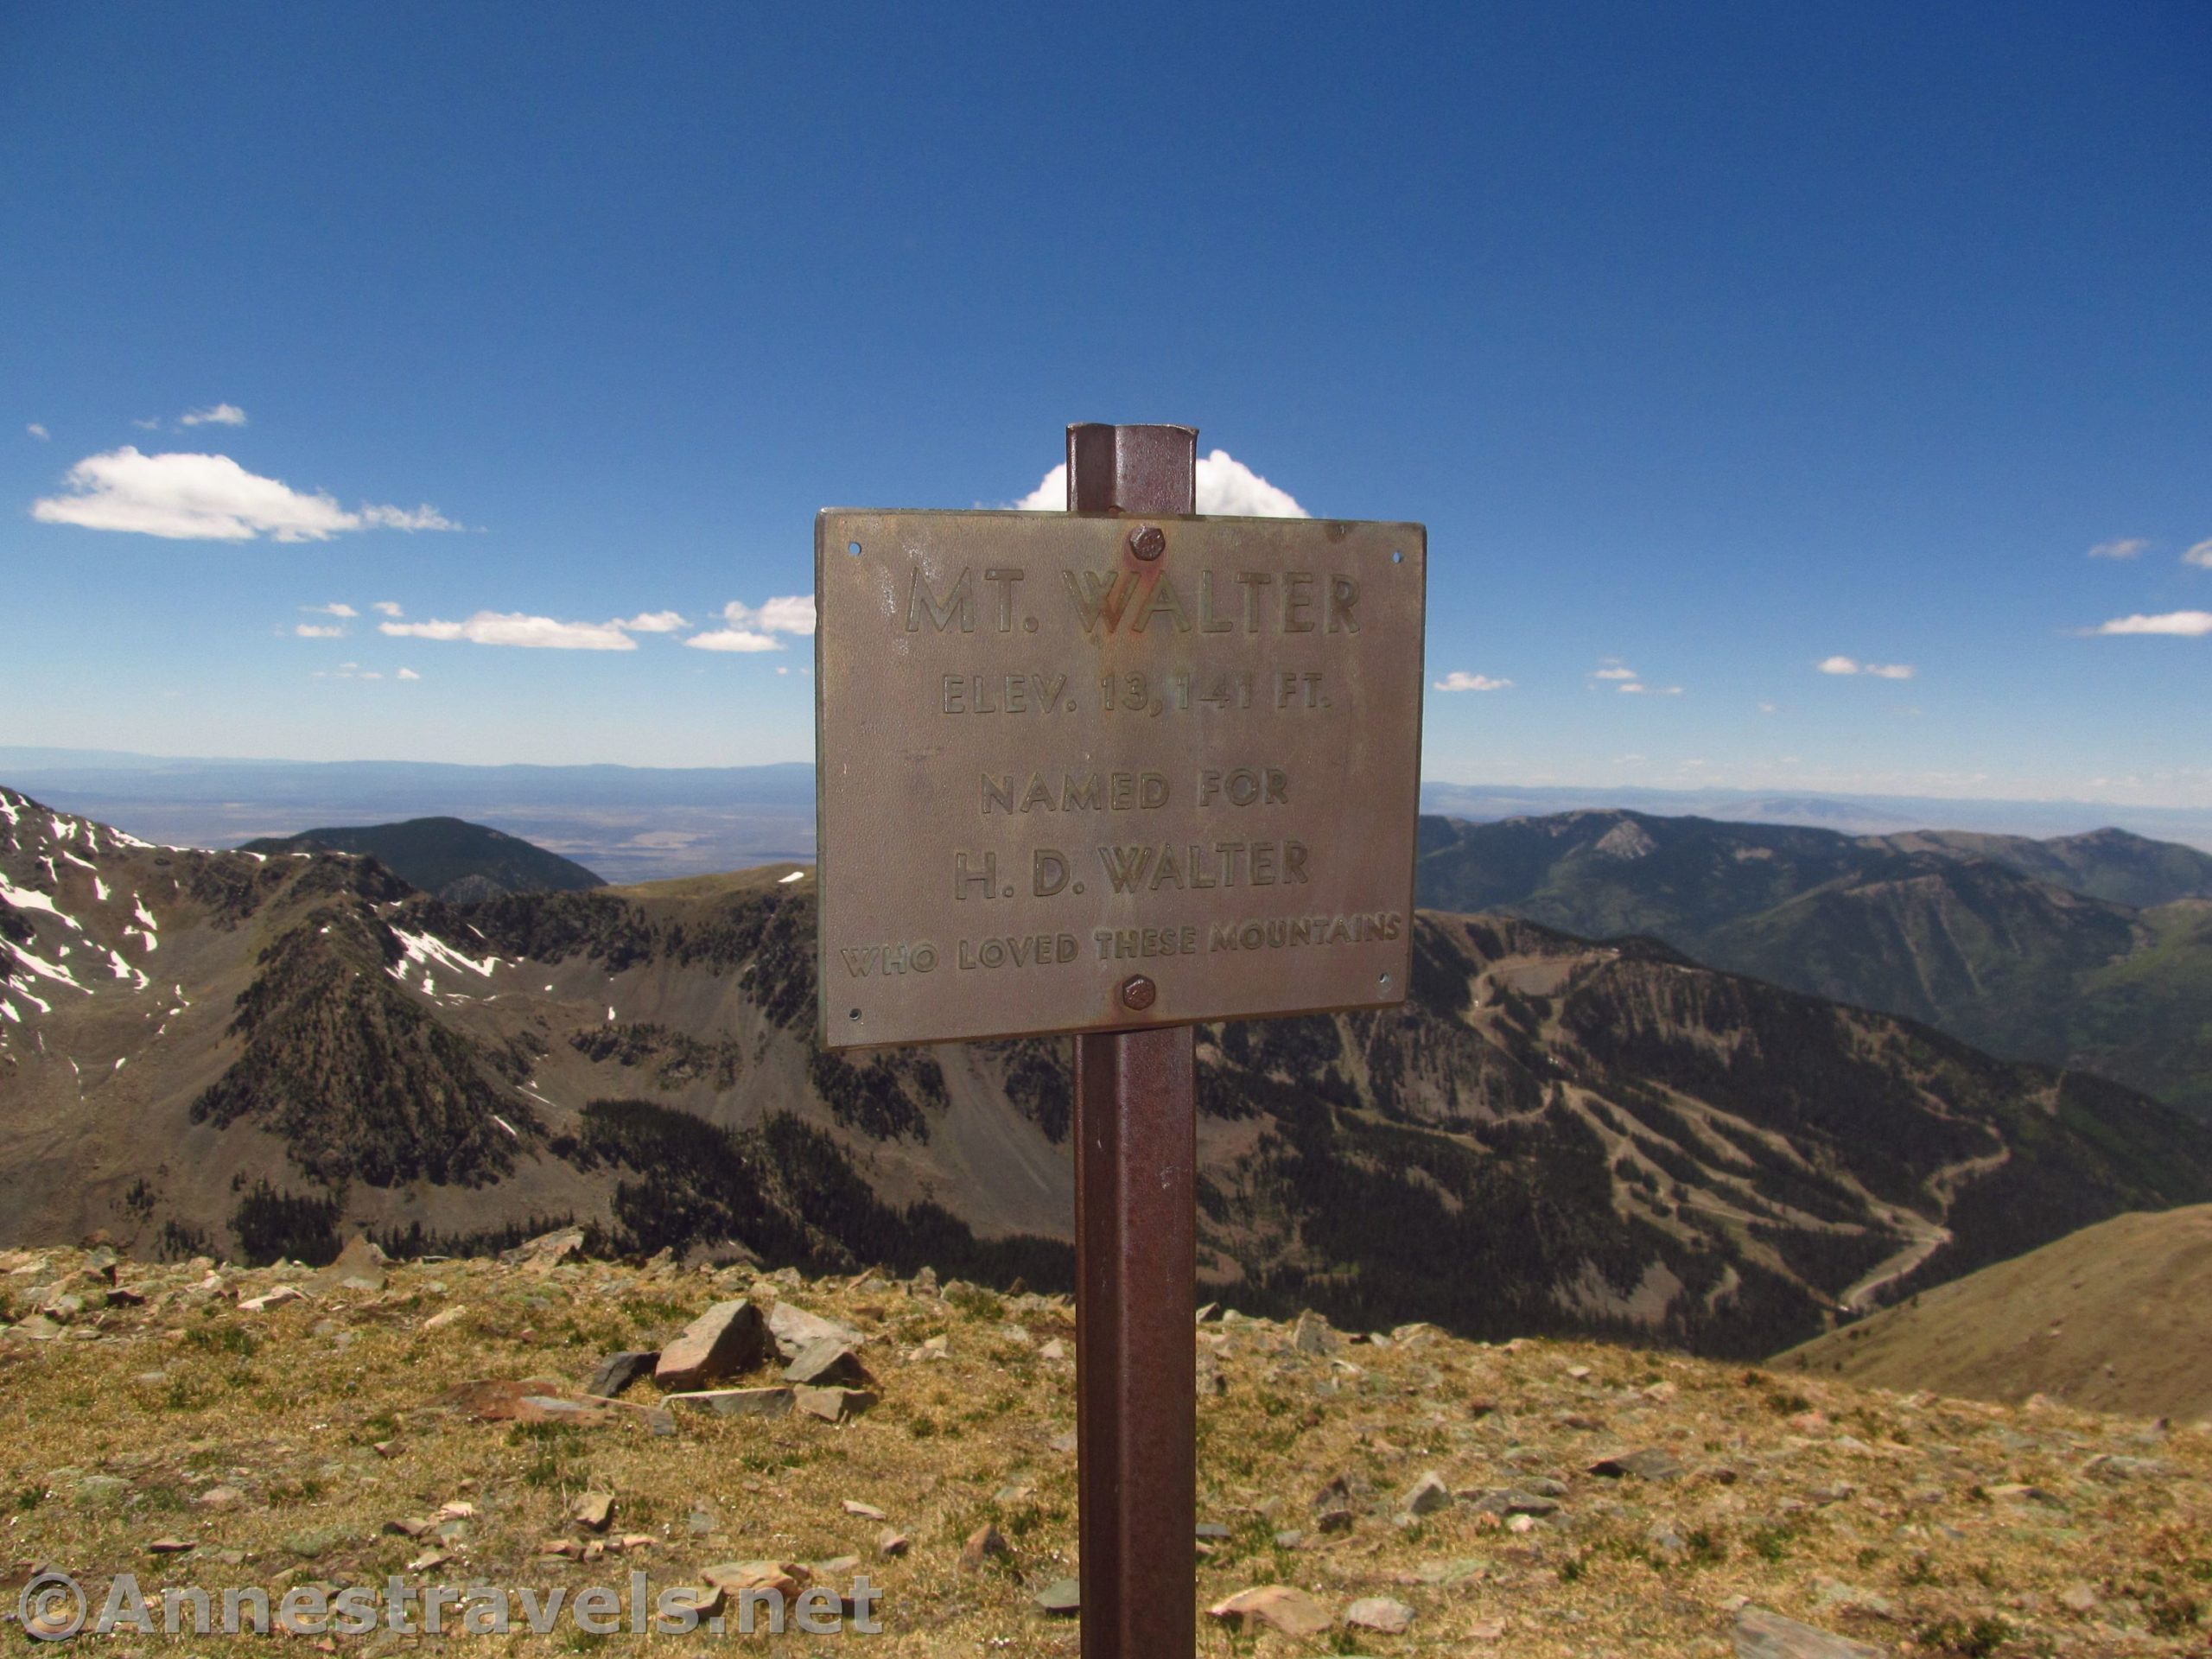 Mount Walter – the Second Highest Point in New Mexico!